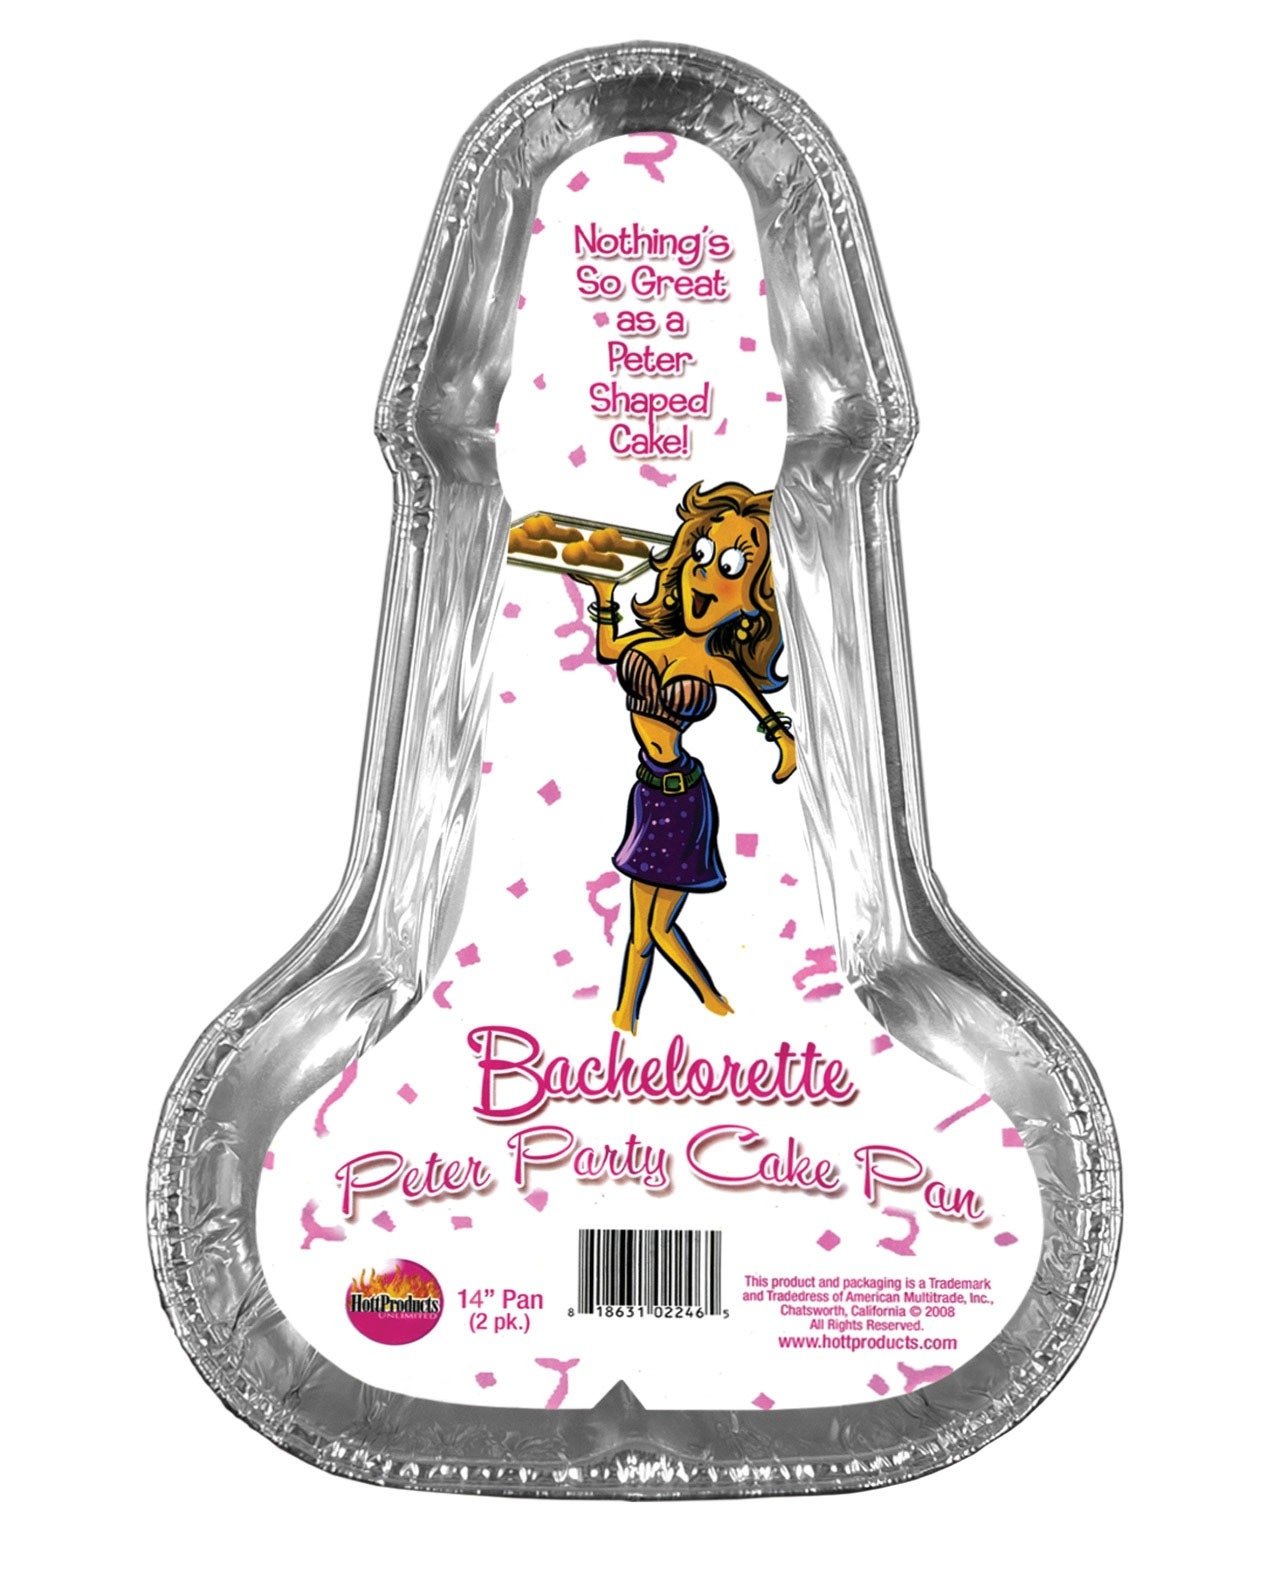 https://www.shopcupids.com/4509-thickbox_default/bachelorette-disposable-peter-party-cake-pan-large-pack-of-2.jpg